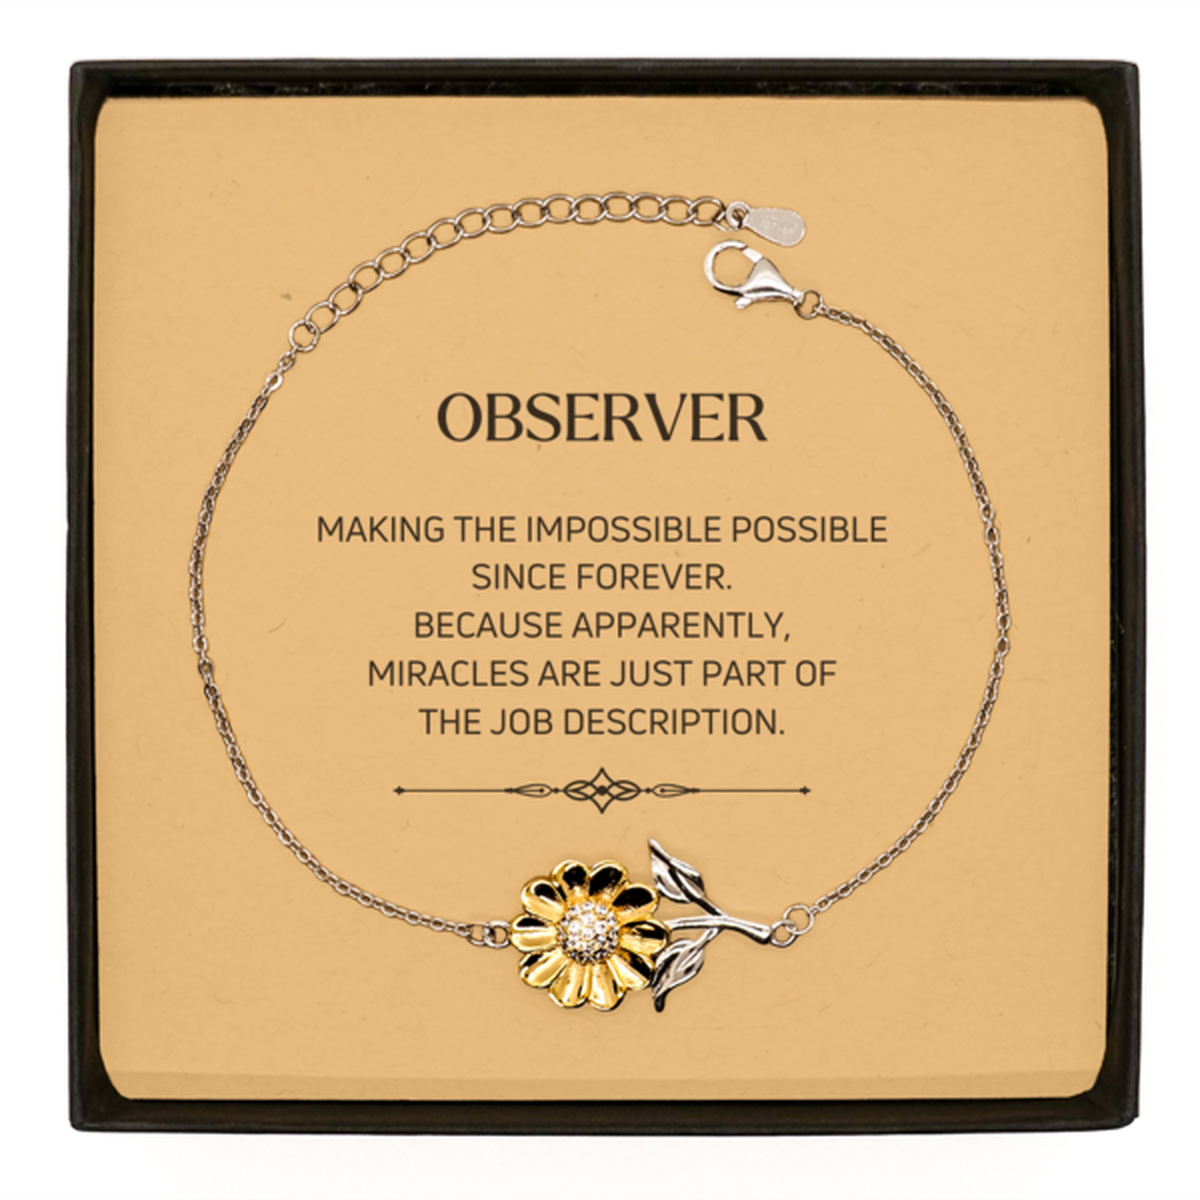 Funny Observer Gifts, Miracles are just part of the job description, Inspirational Birthday Sunflower Bracelet For Observer, Men, Women, Coworkers, Friends, Boss